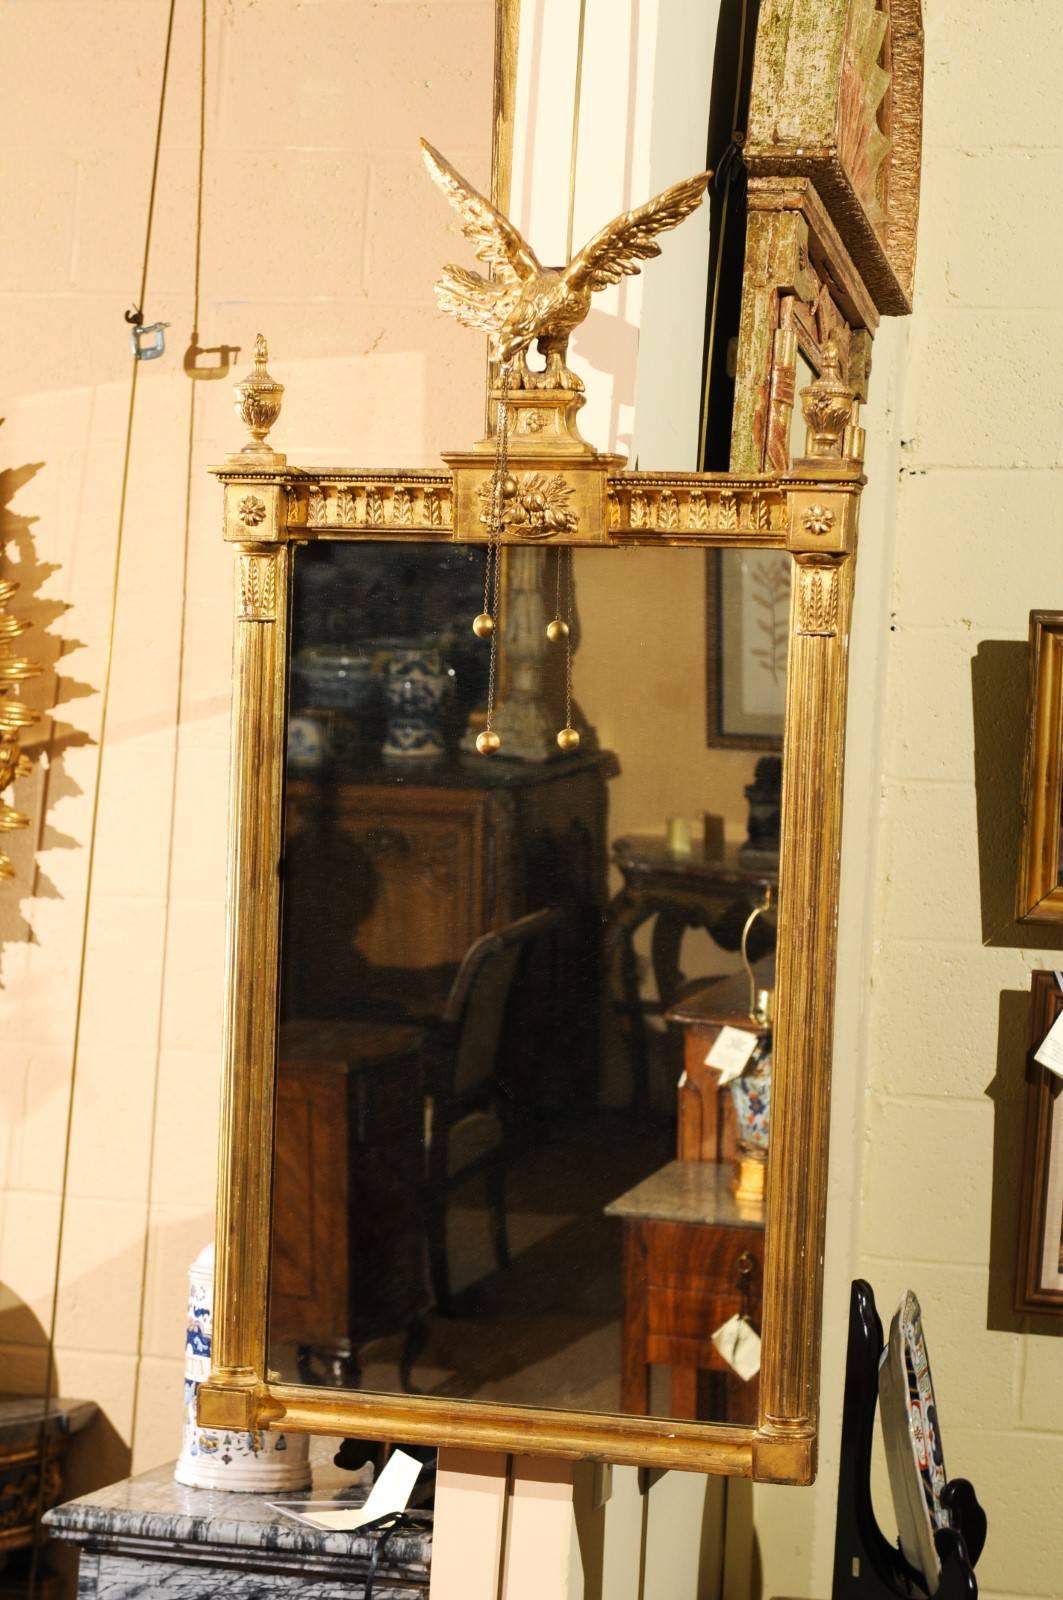 The federal giltwood mirror with eagle crest in neoclassical motifs.